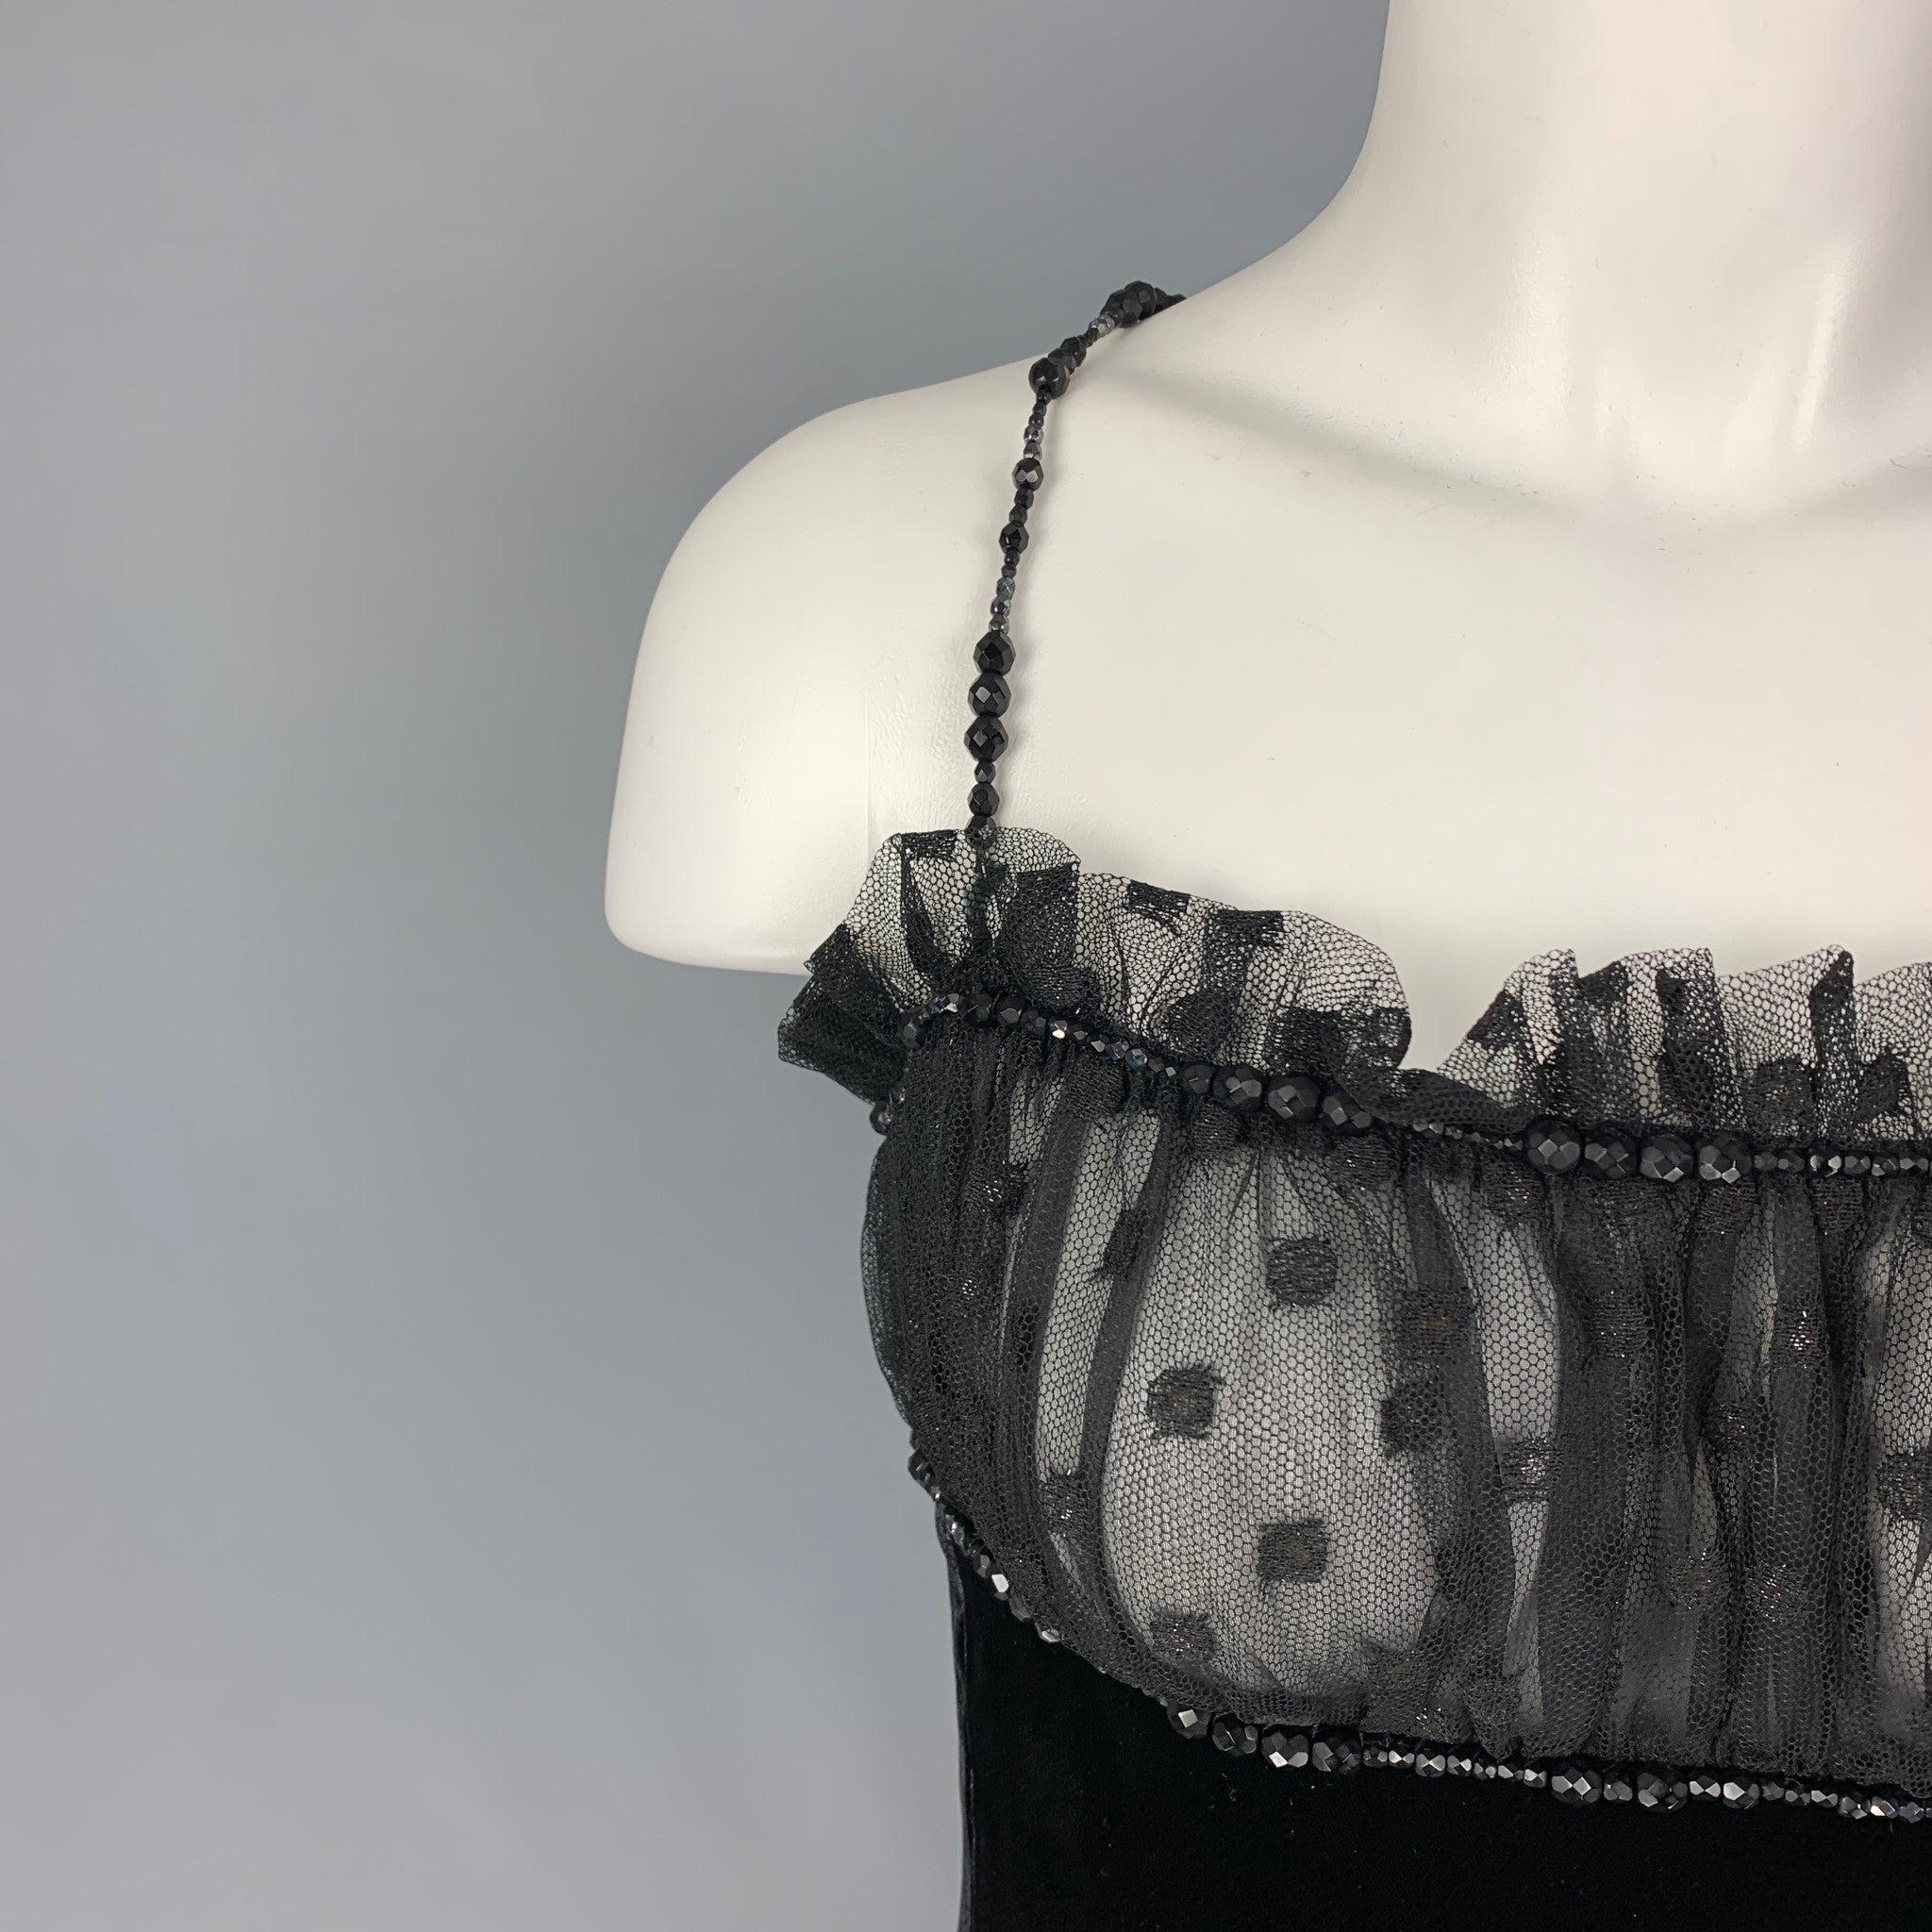 GUY LAROCHE dress comes in a black viscose / silk with a slip liner featuring beaded spaghetti straps, lace panel, and a back zipper closure. Made in France.
Very Good
Pre-Owned Condition. 

Marked:  F 42 / USA 10 / GB 14 / D 40 

Measurements: 
